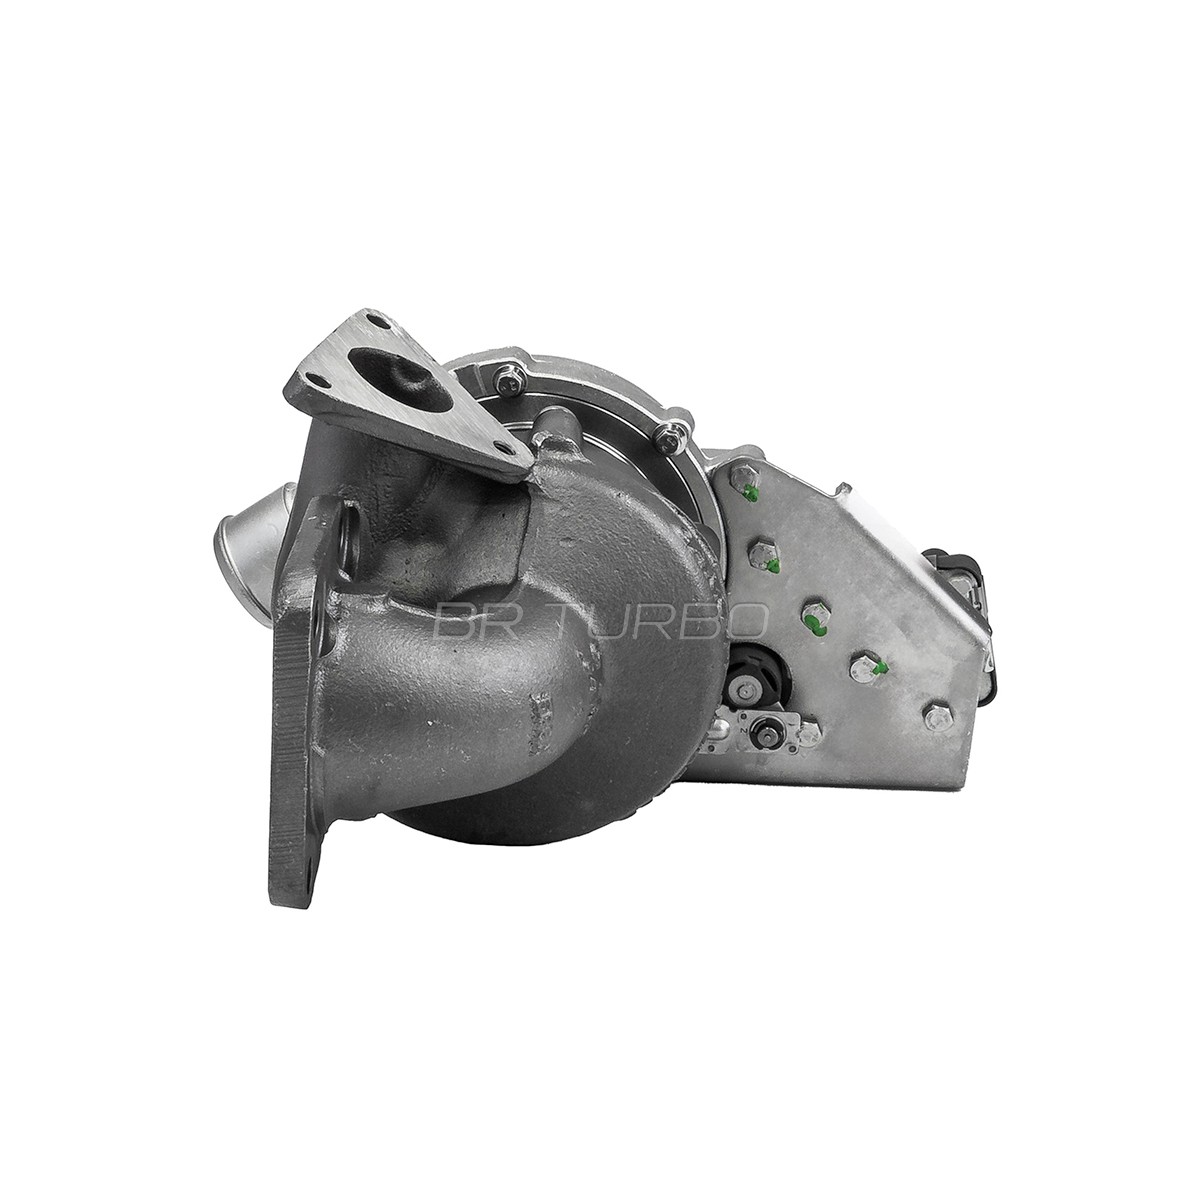 752610-5001RSM Turbocharger 752610-5001RSM BR Turbo Turbo, with attachment material